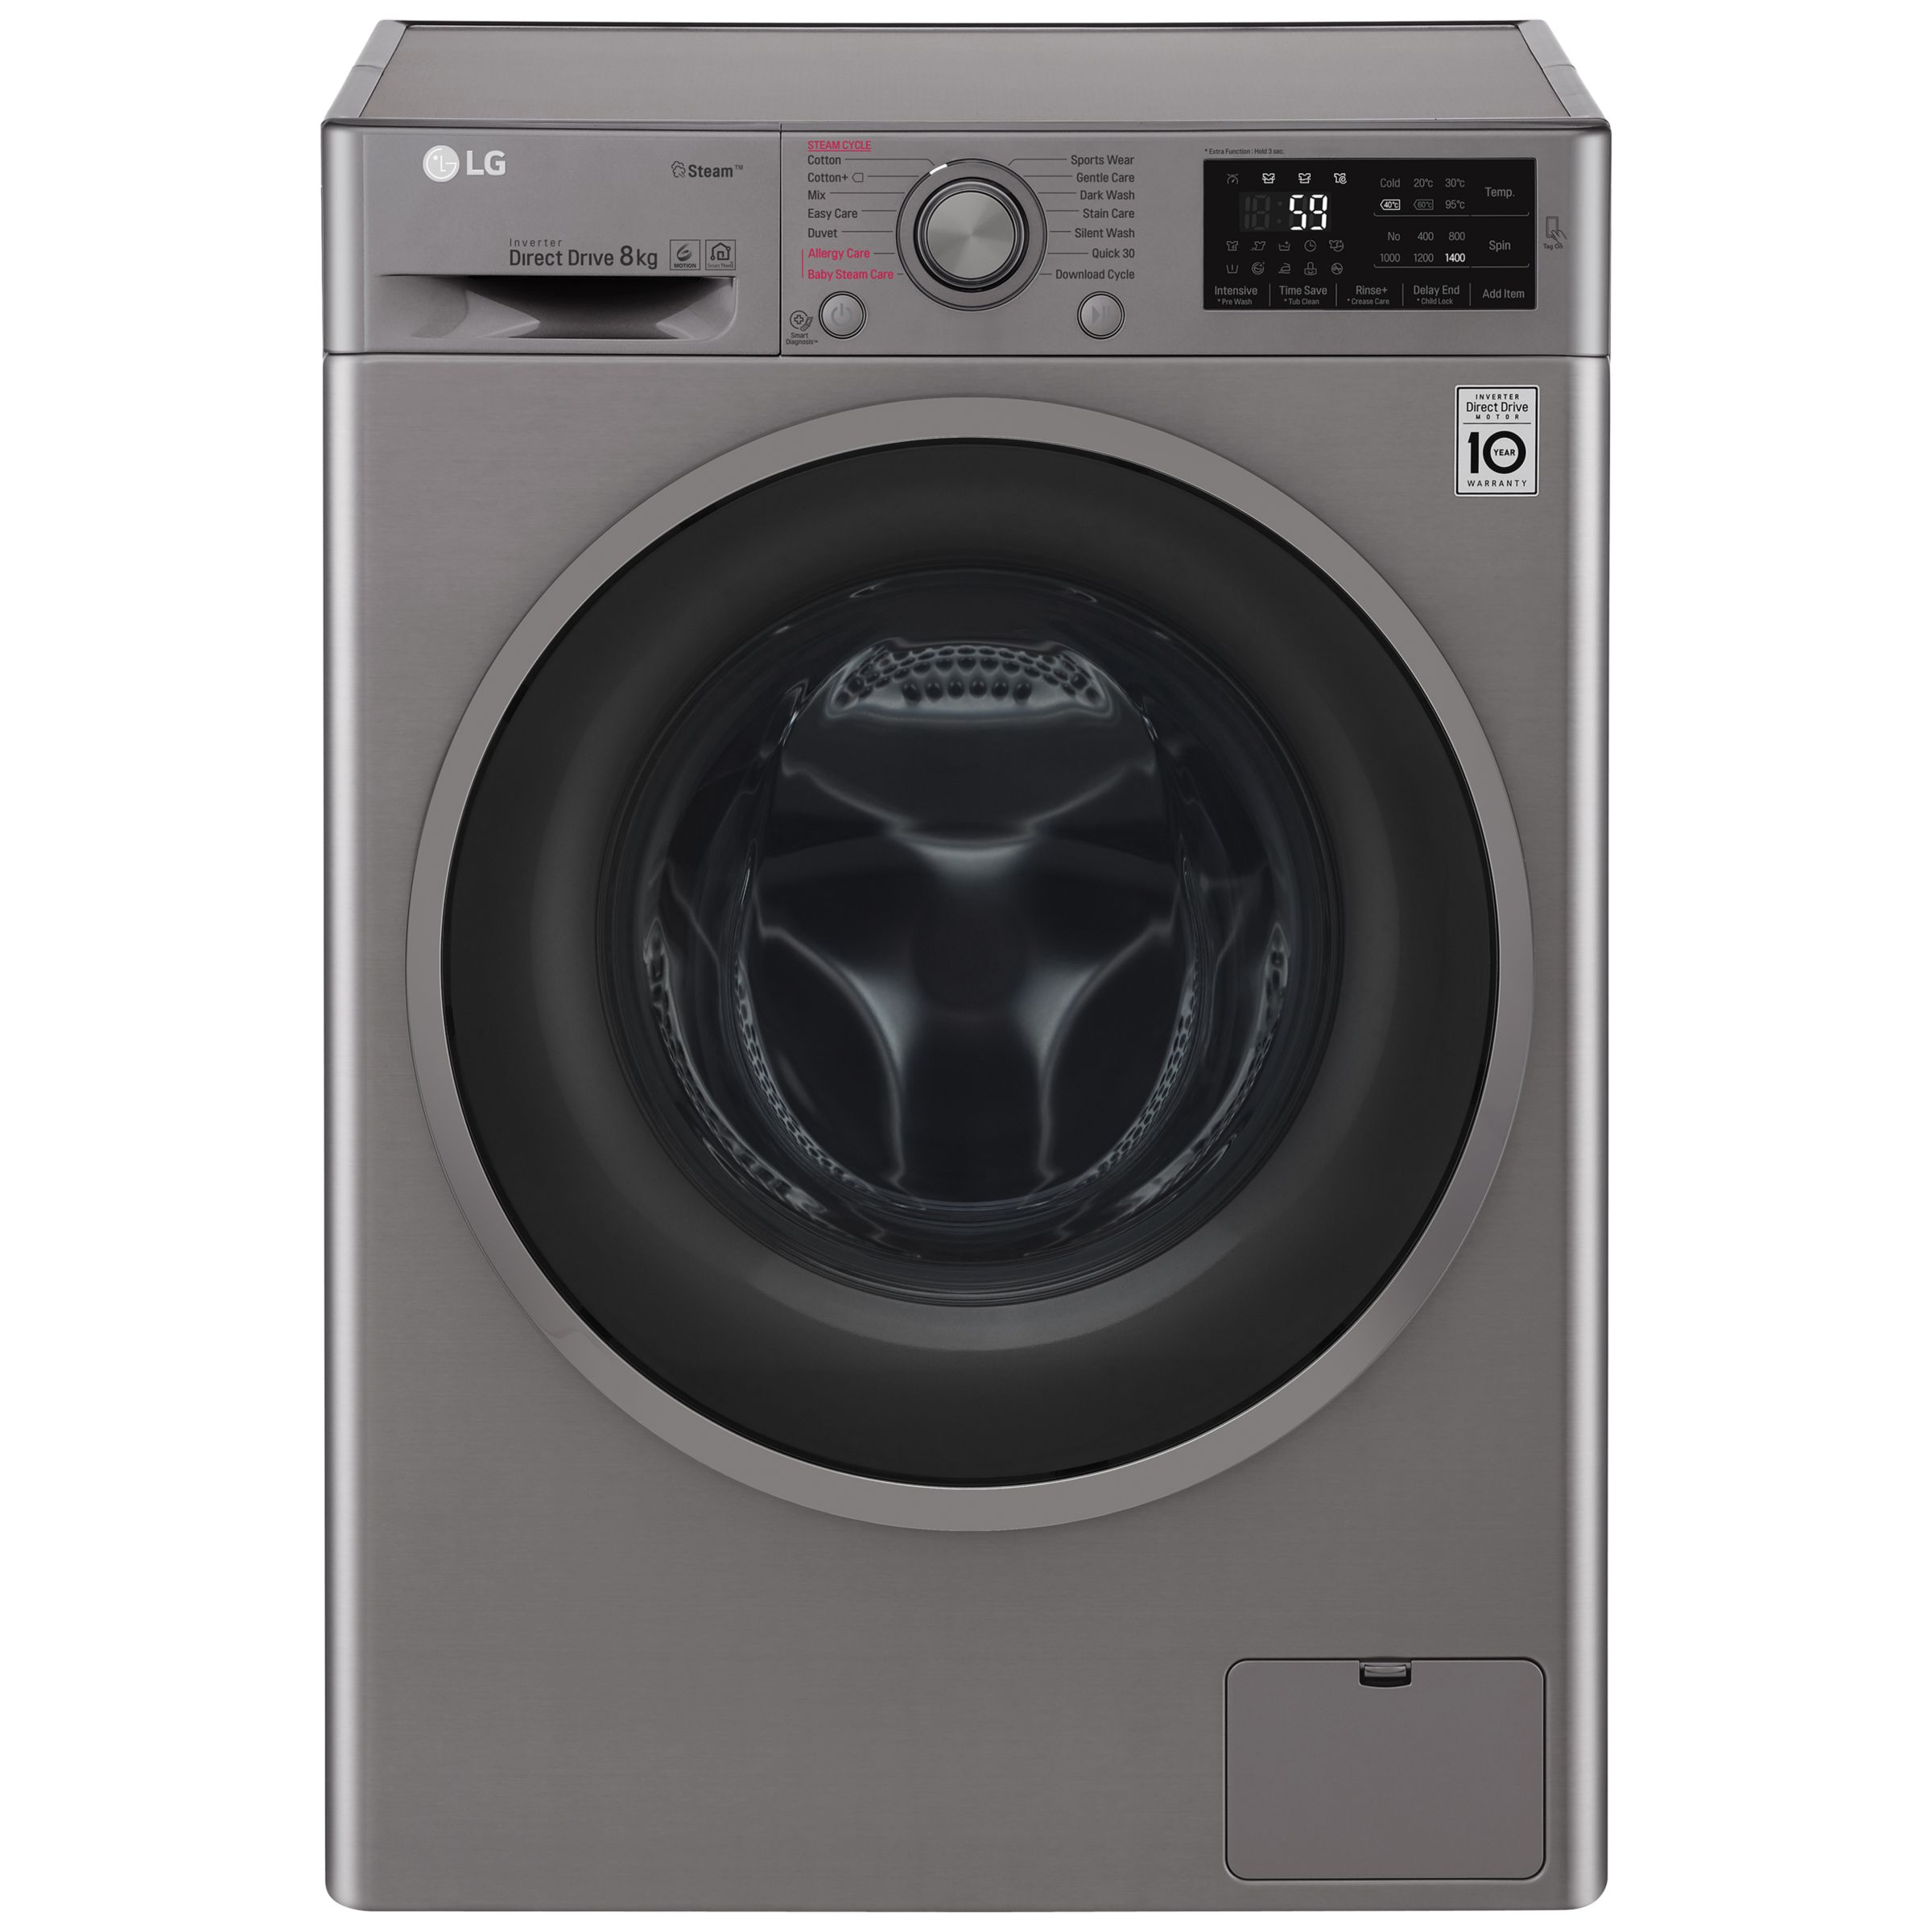 LG F4J6TY8S Freestanding Washing Machine, 8kg Load, A+++ Energy Rating, 1400rpm Spin, Shiny Steel